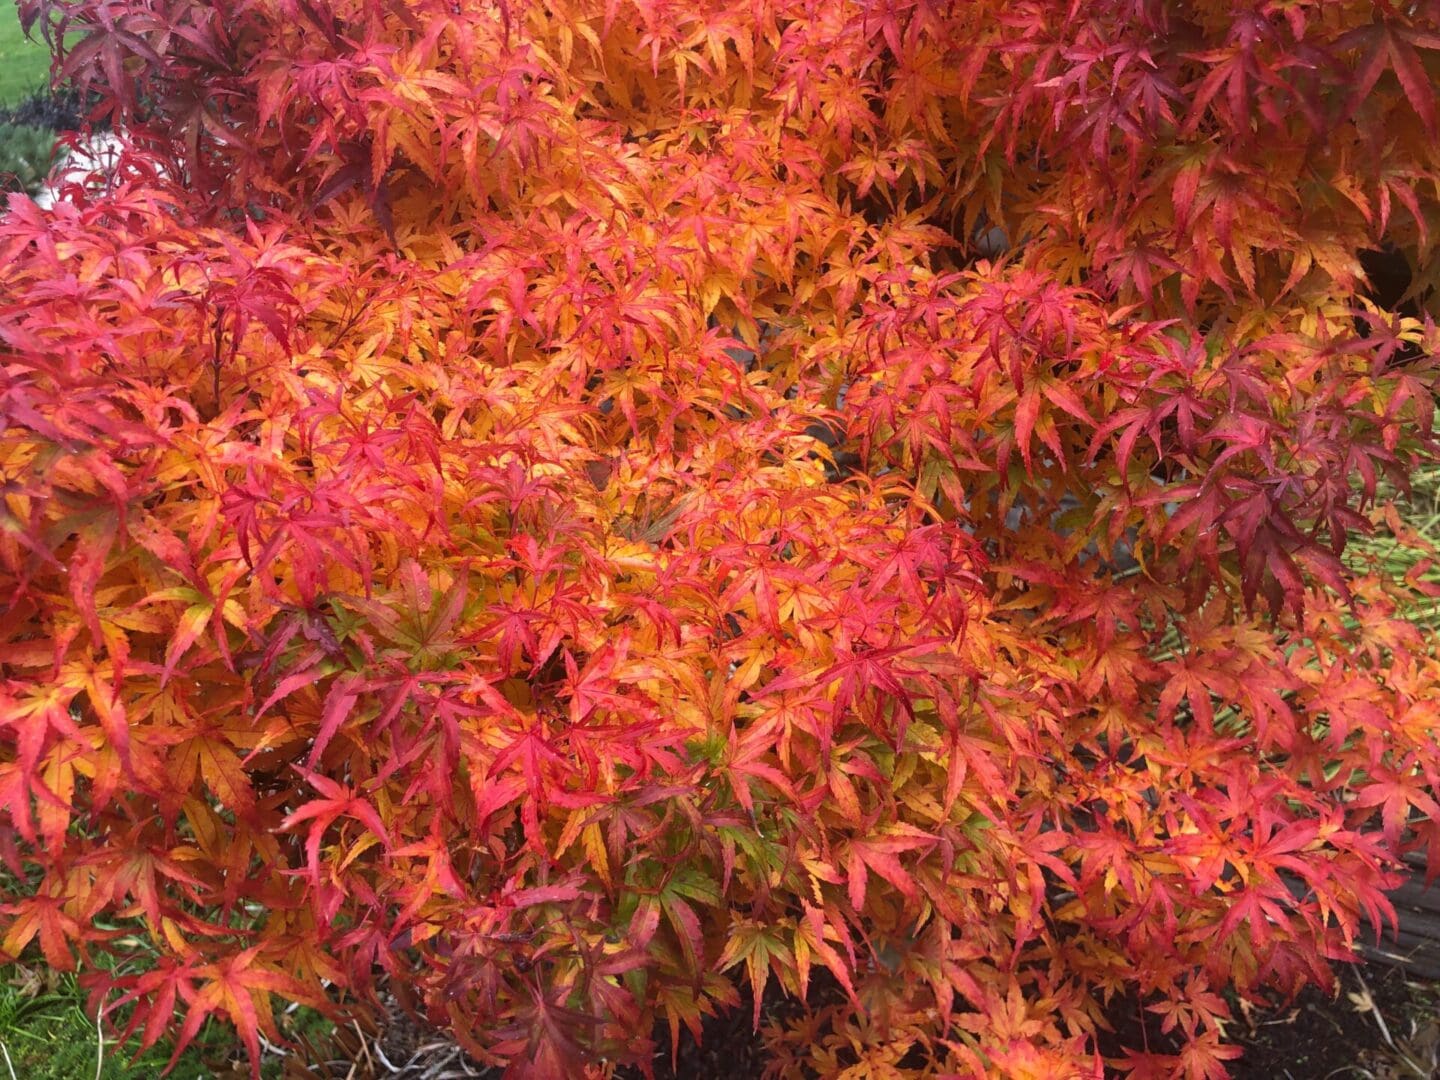 A close up of the leaves on a tree